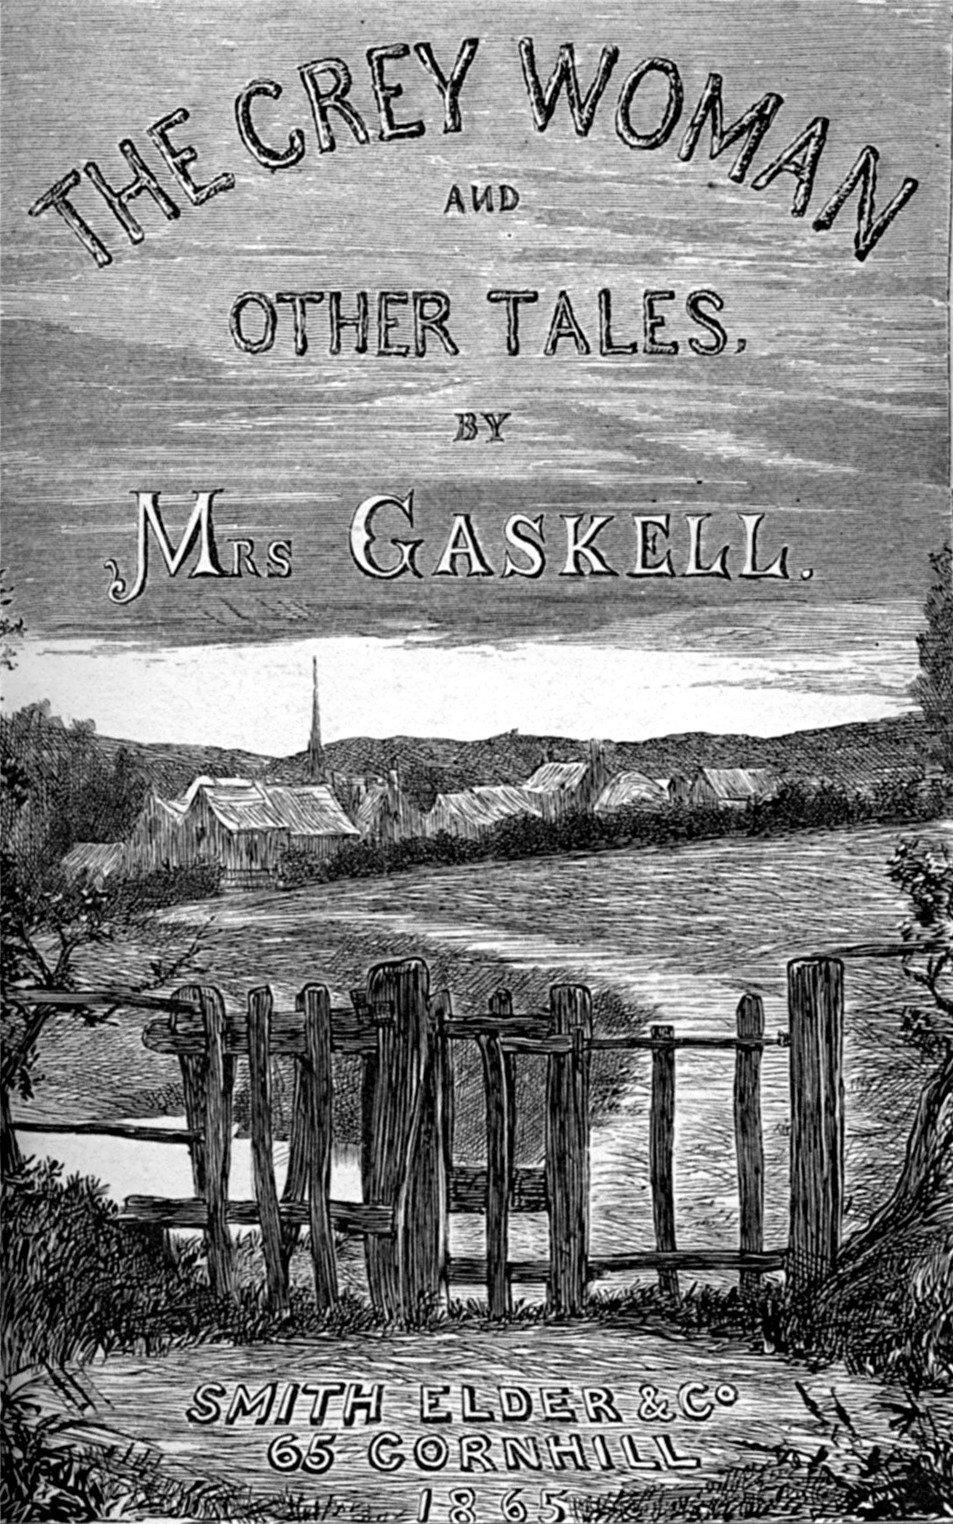 TITLE PAGE
(THE GREY WOMAN AND OTHER TALES, by MRS GASKELL).